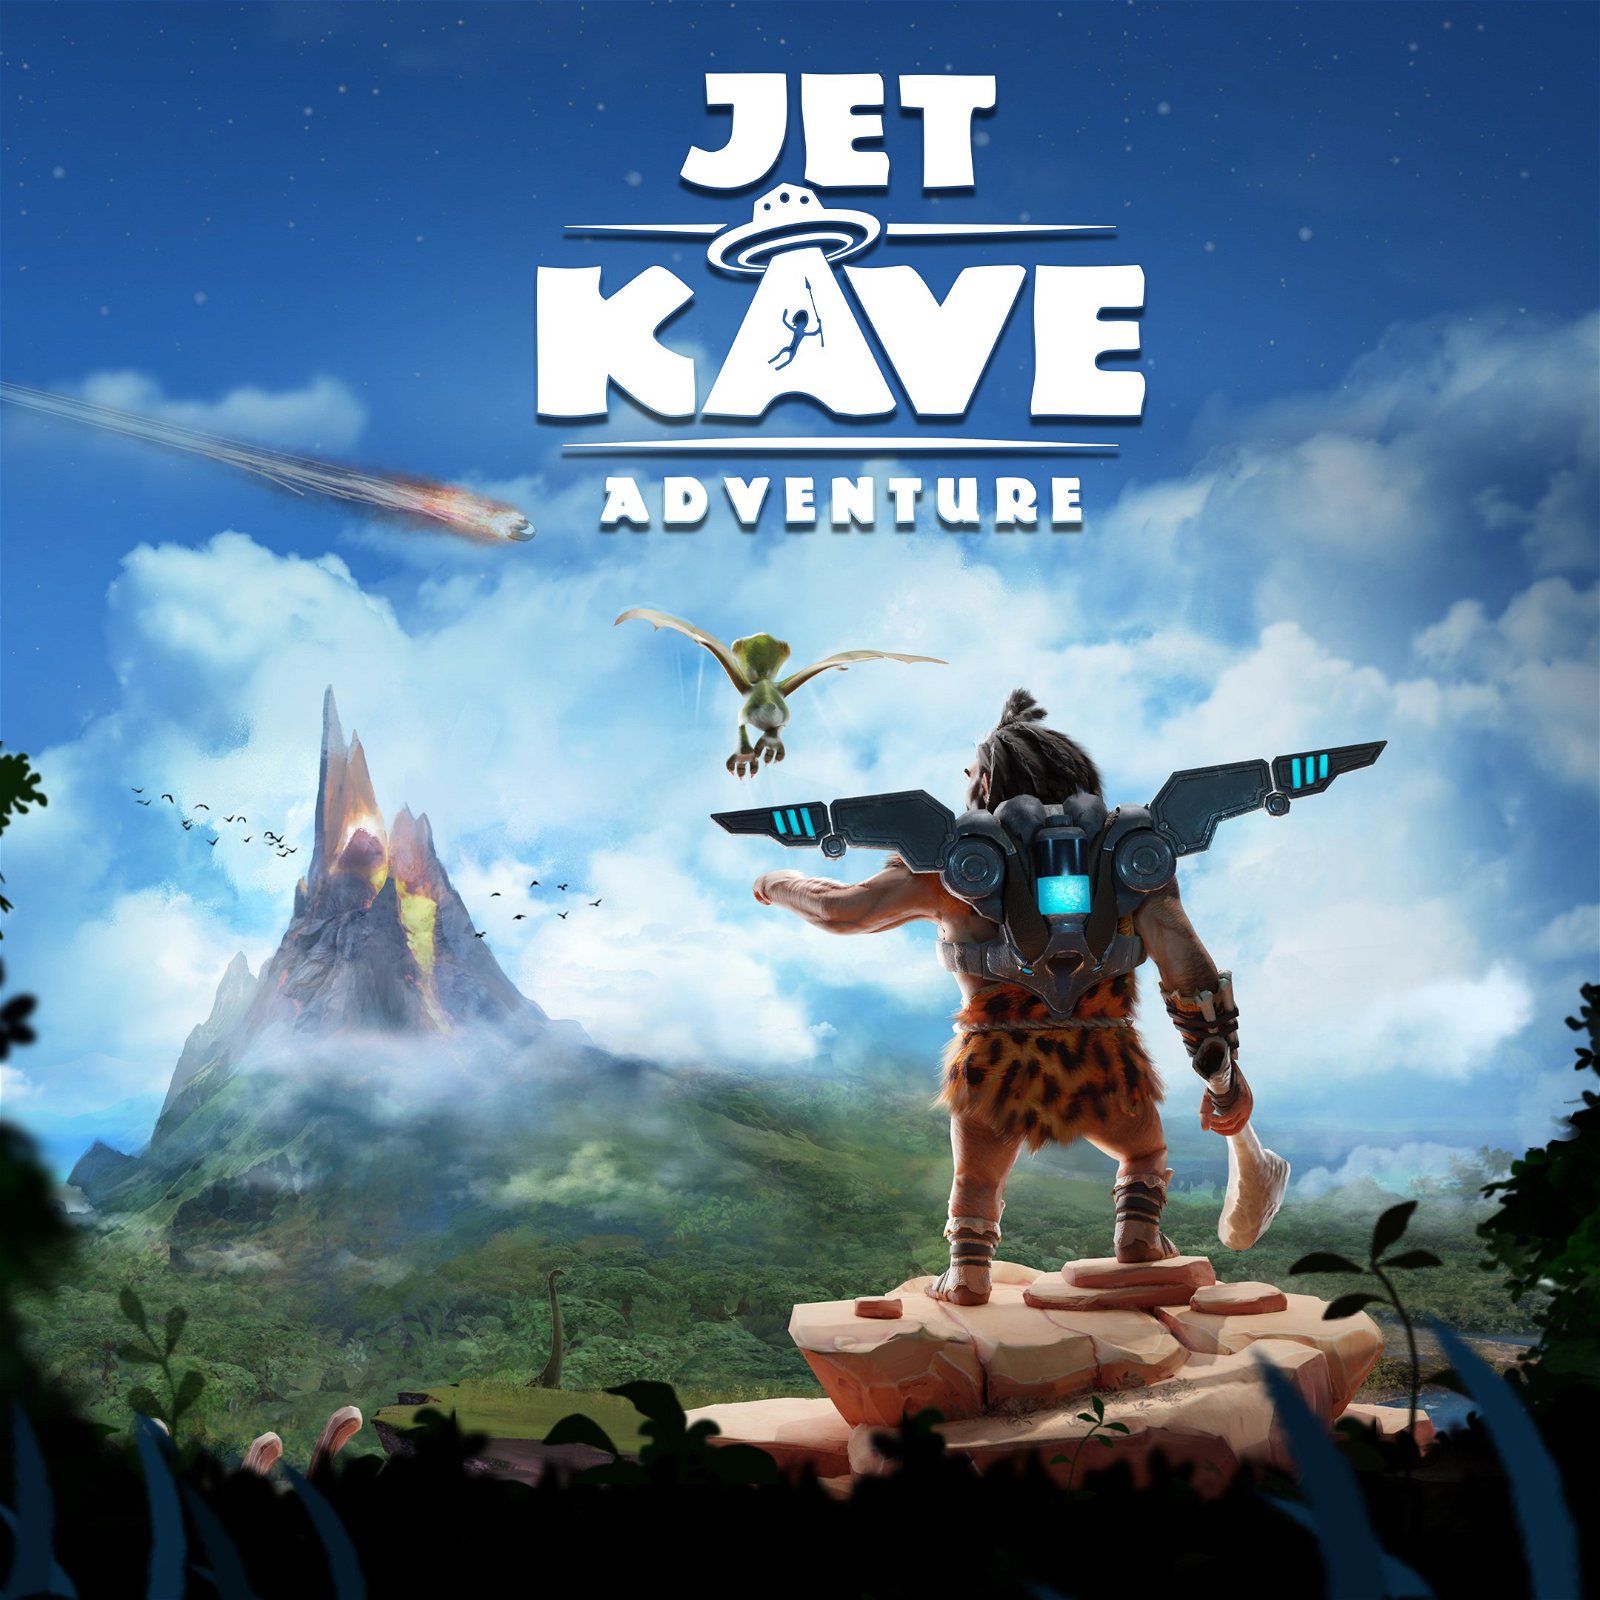 Image of Jet Kave Adventure